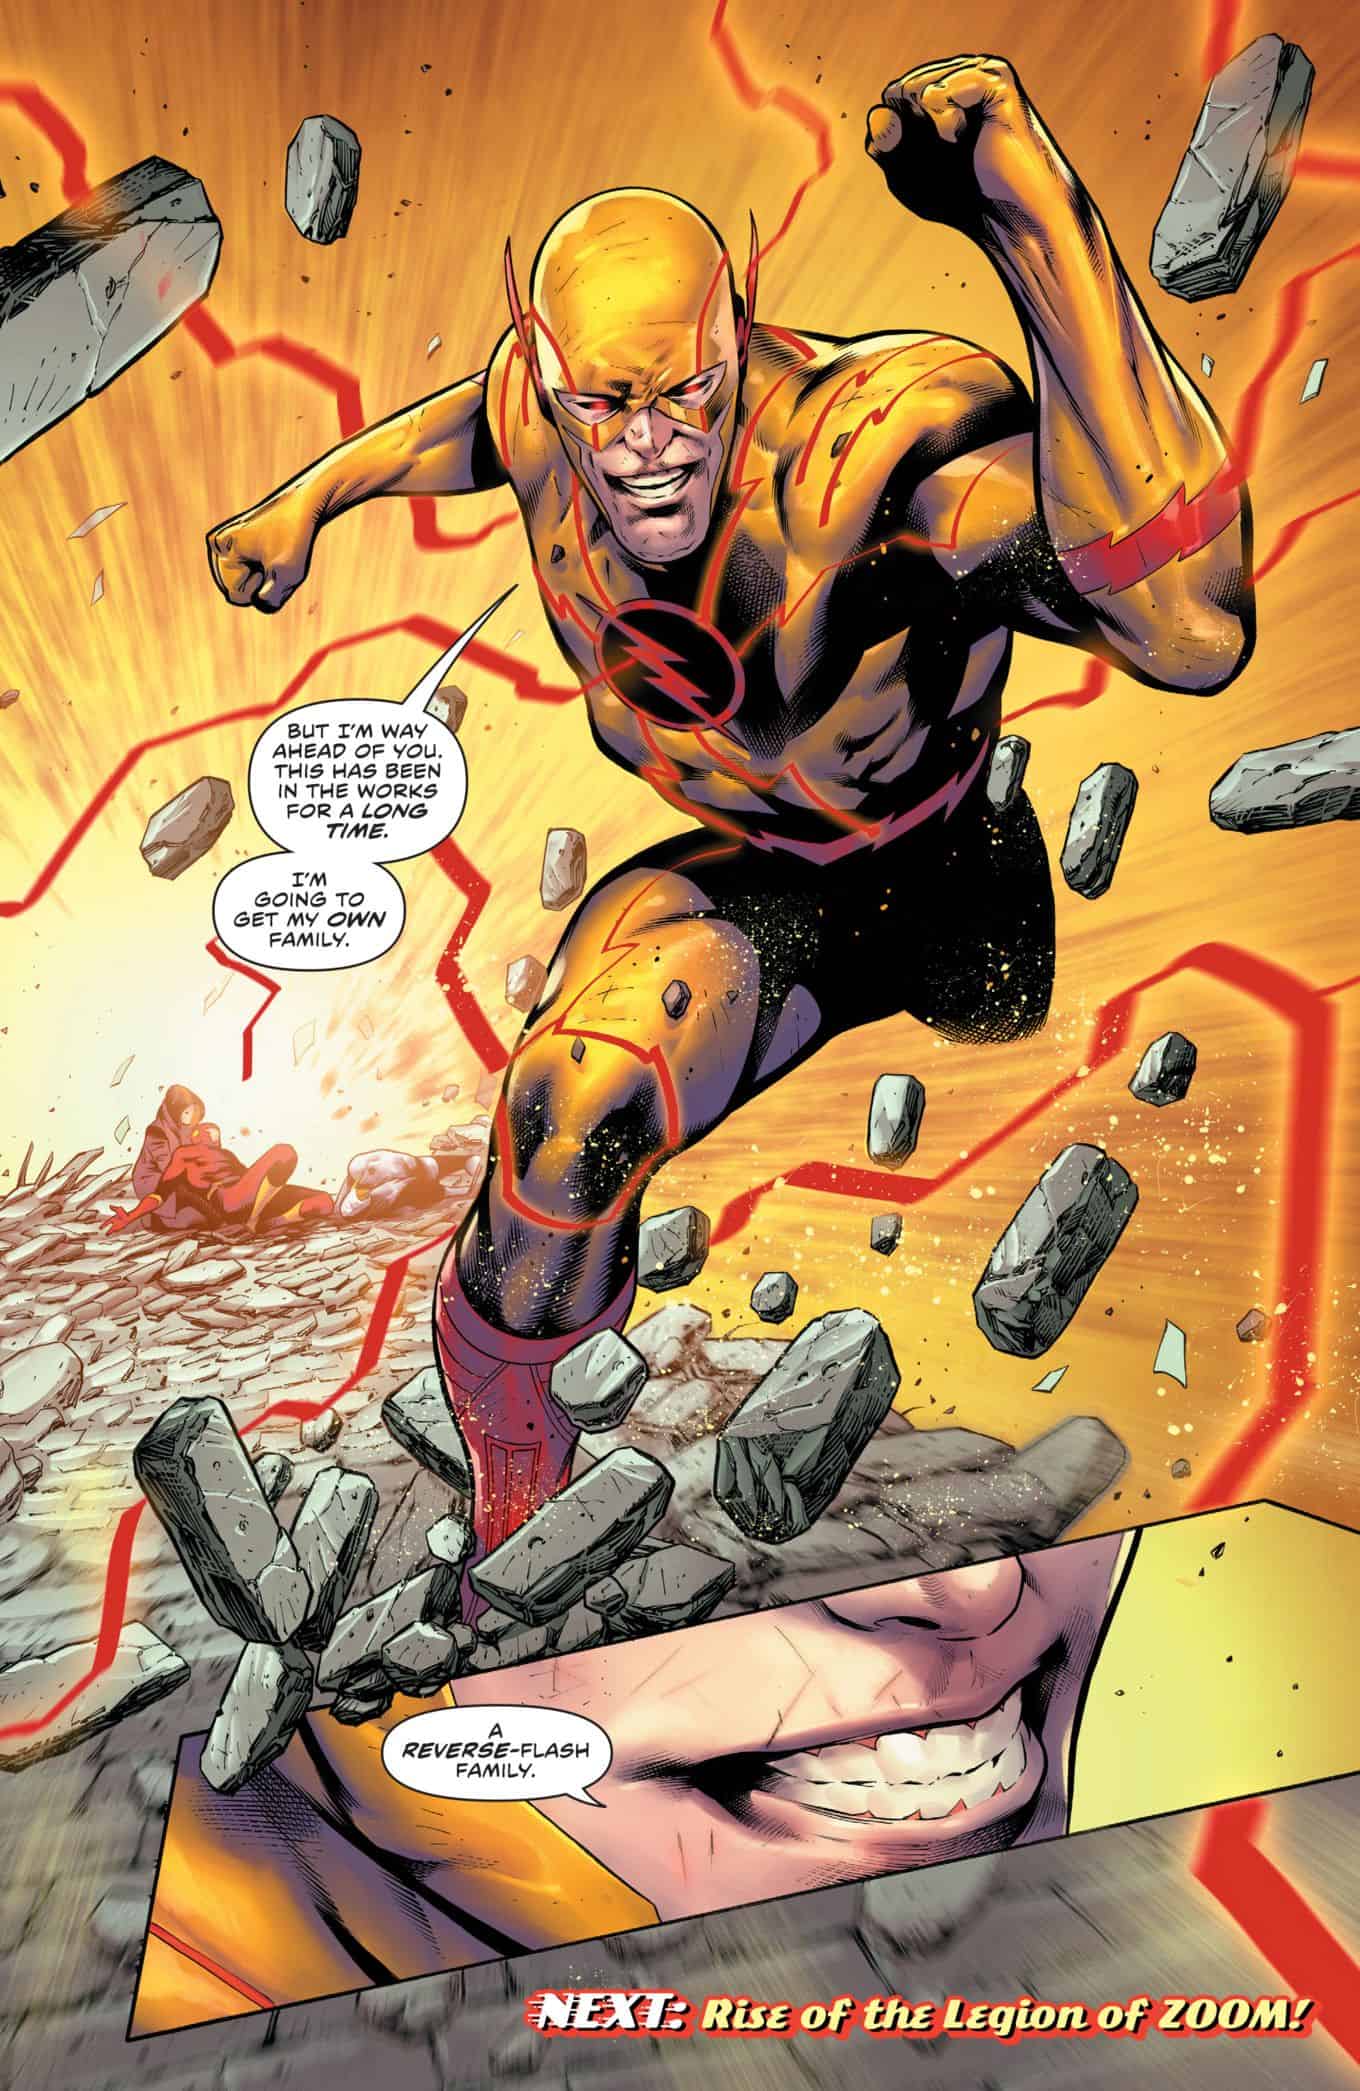 DC Comics Universe & The Flash #755 Spoilers & Review: One Betrayal ...